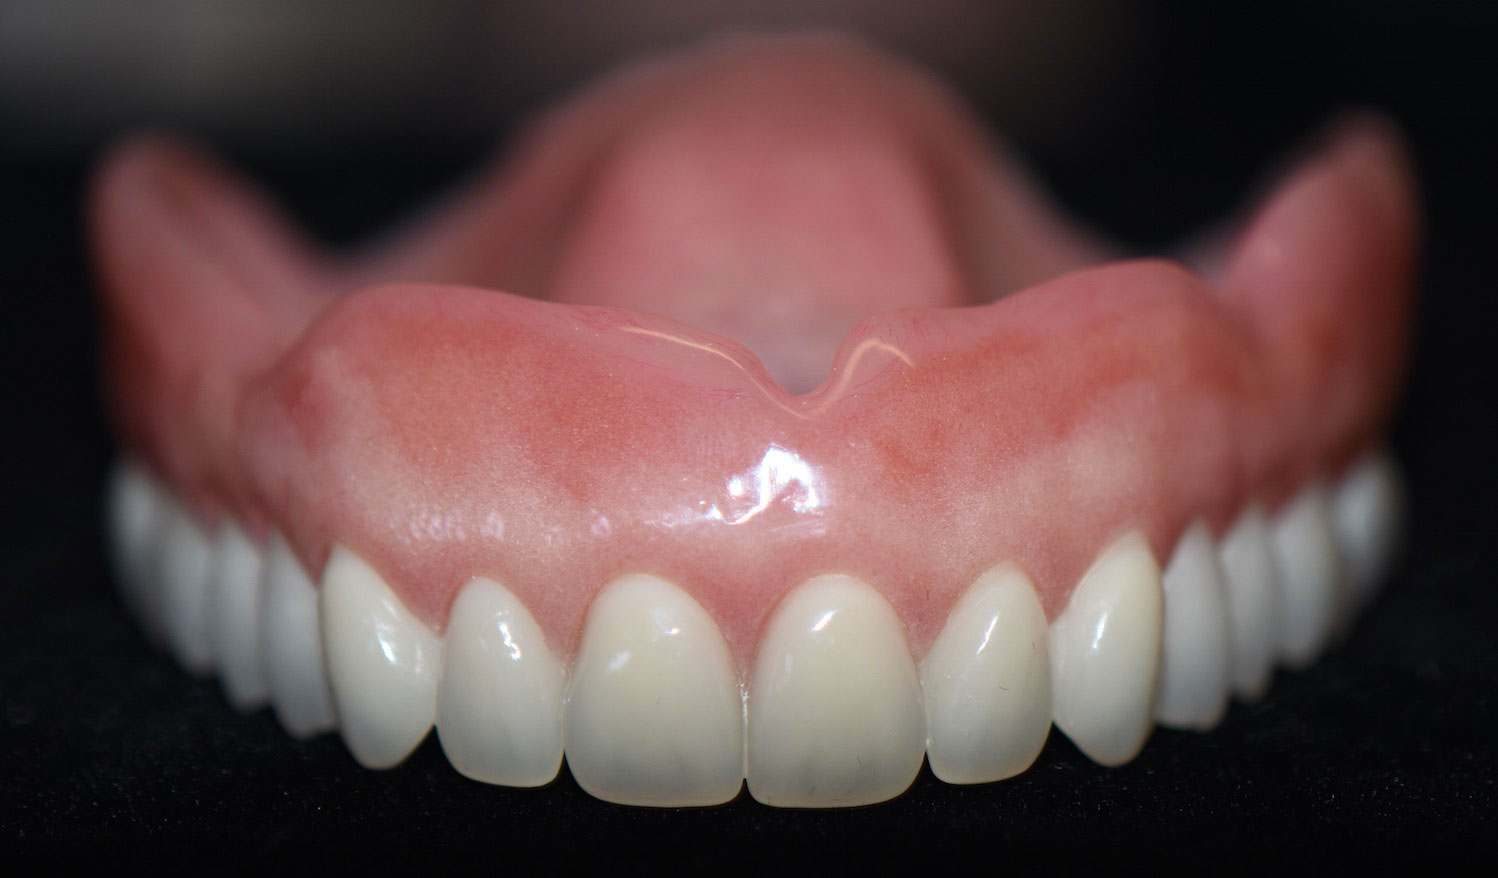 Dentures procedure, results with before/after photos of